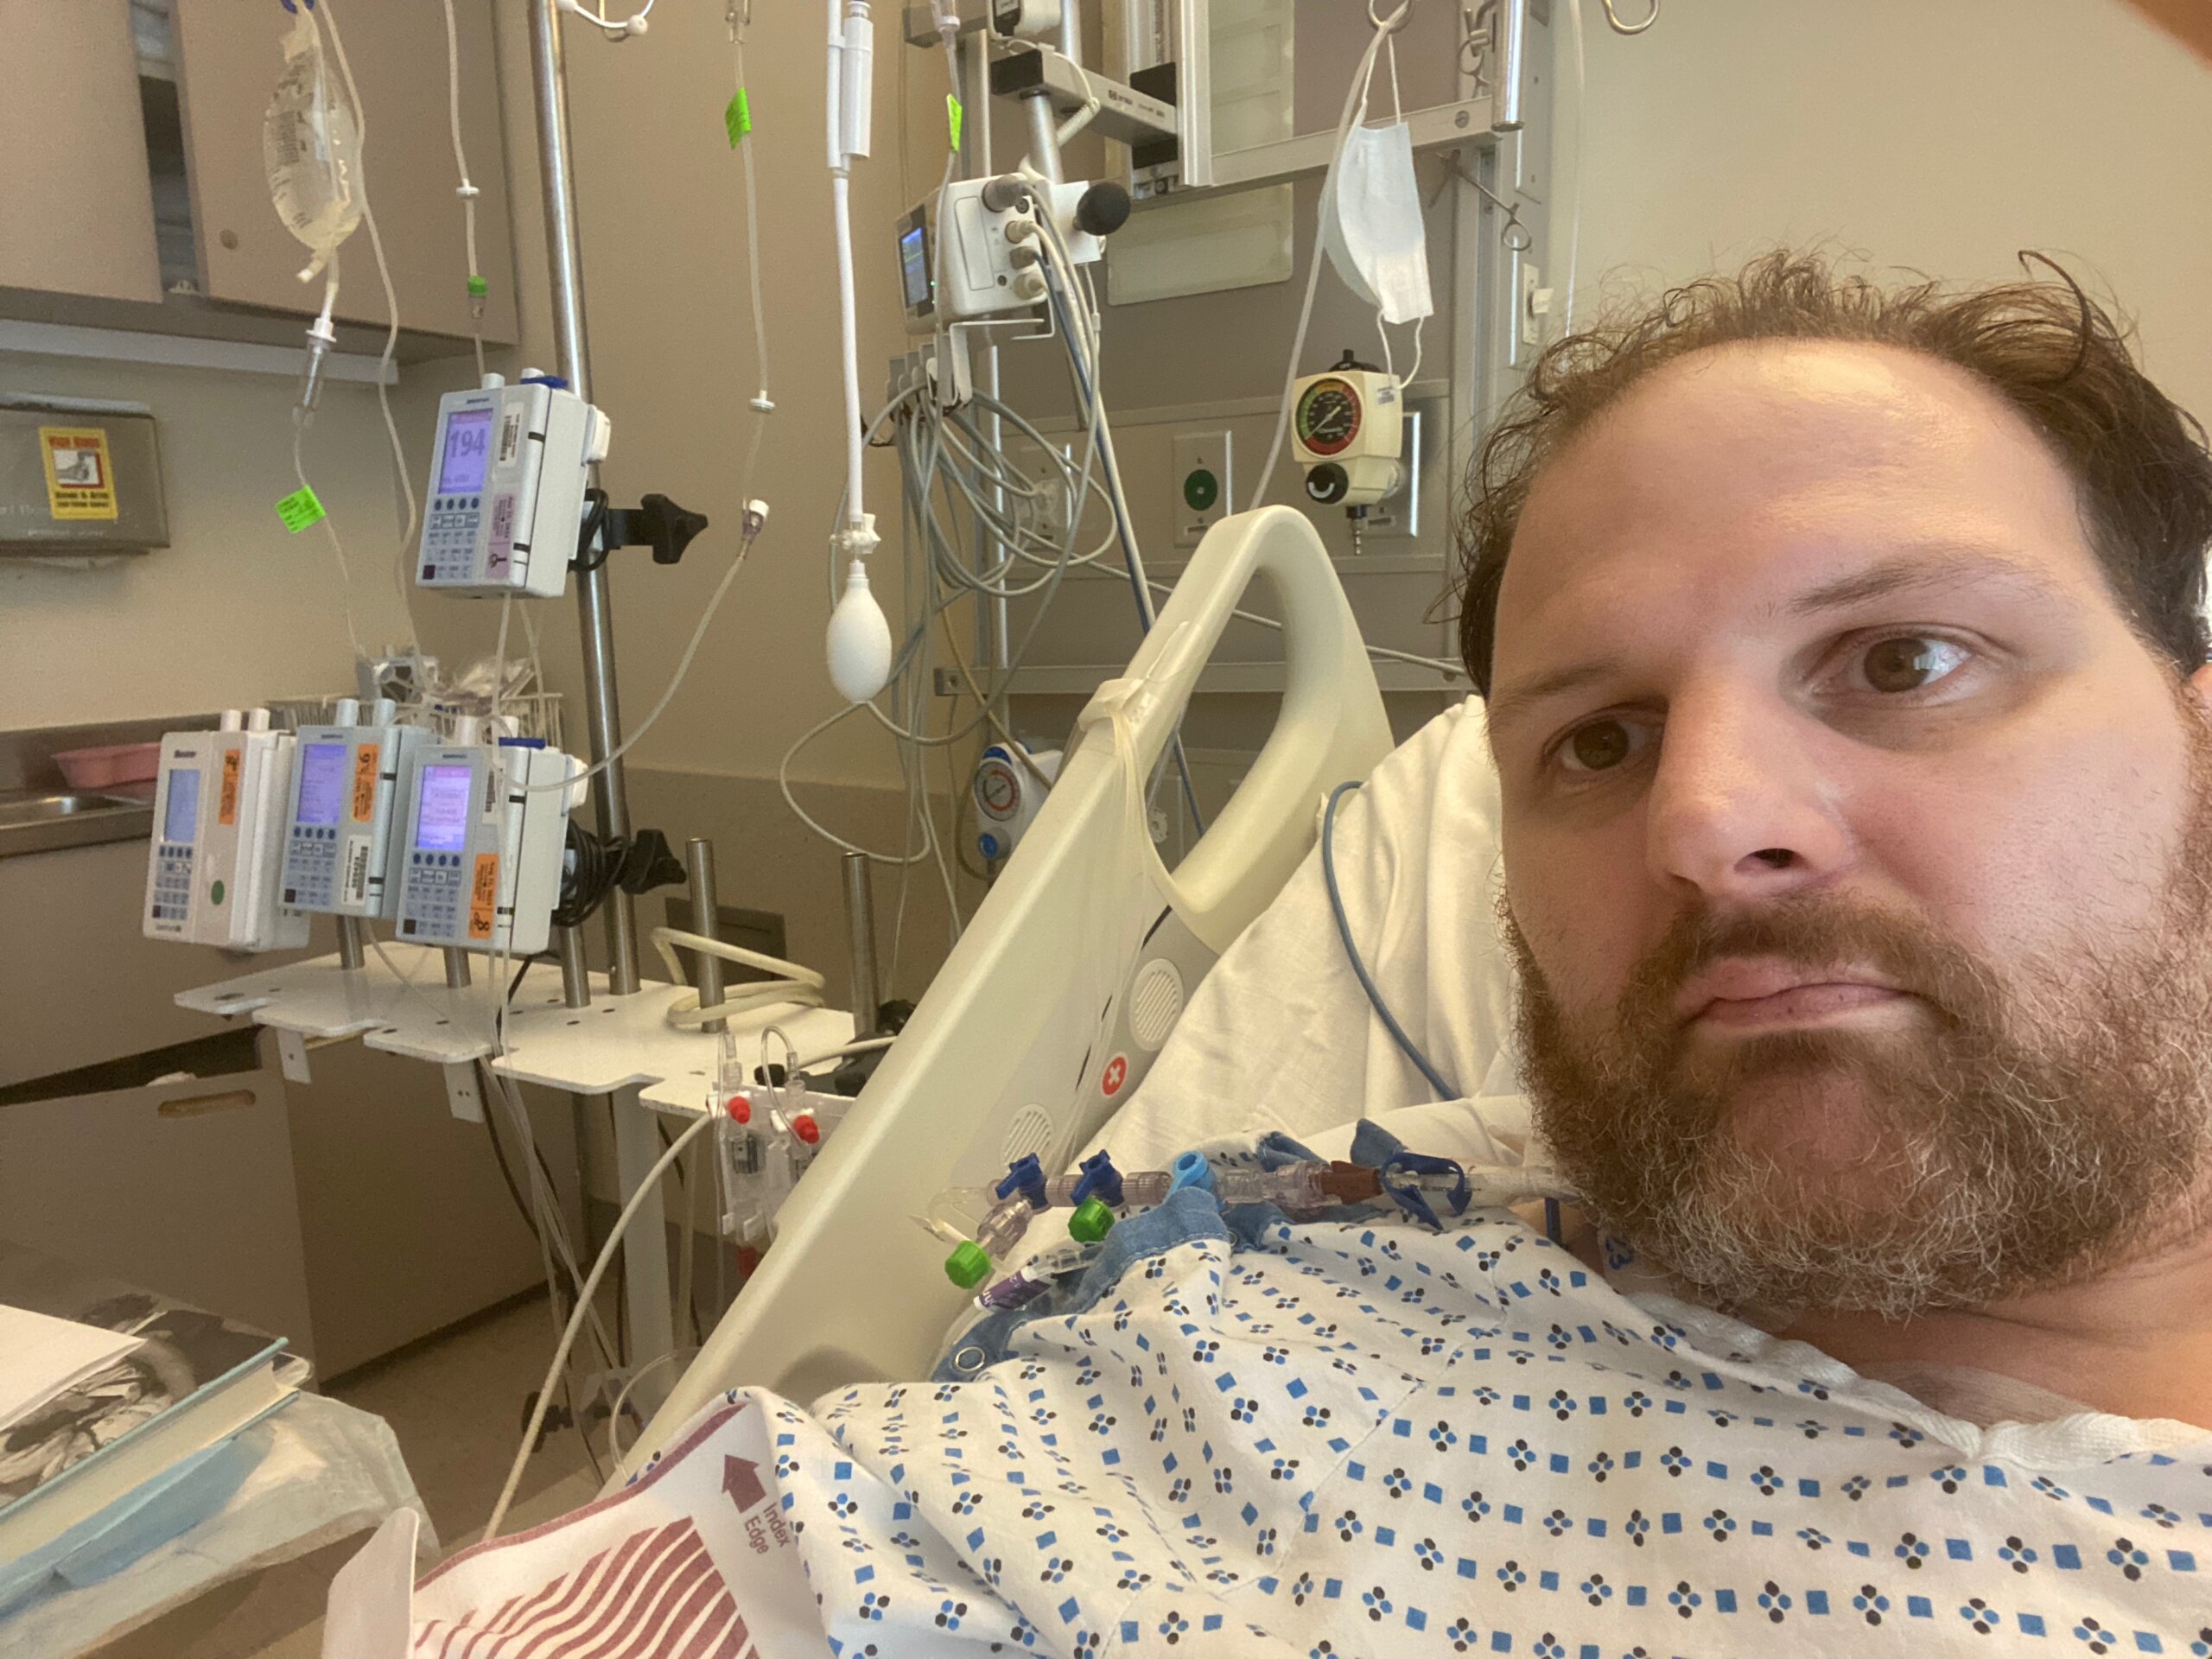 Oliver Peterson in the hospital